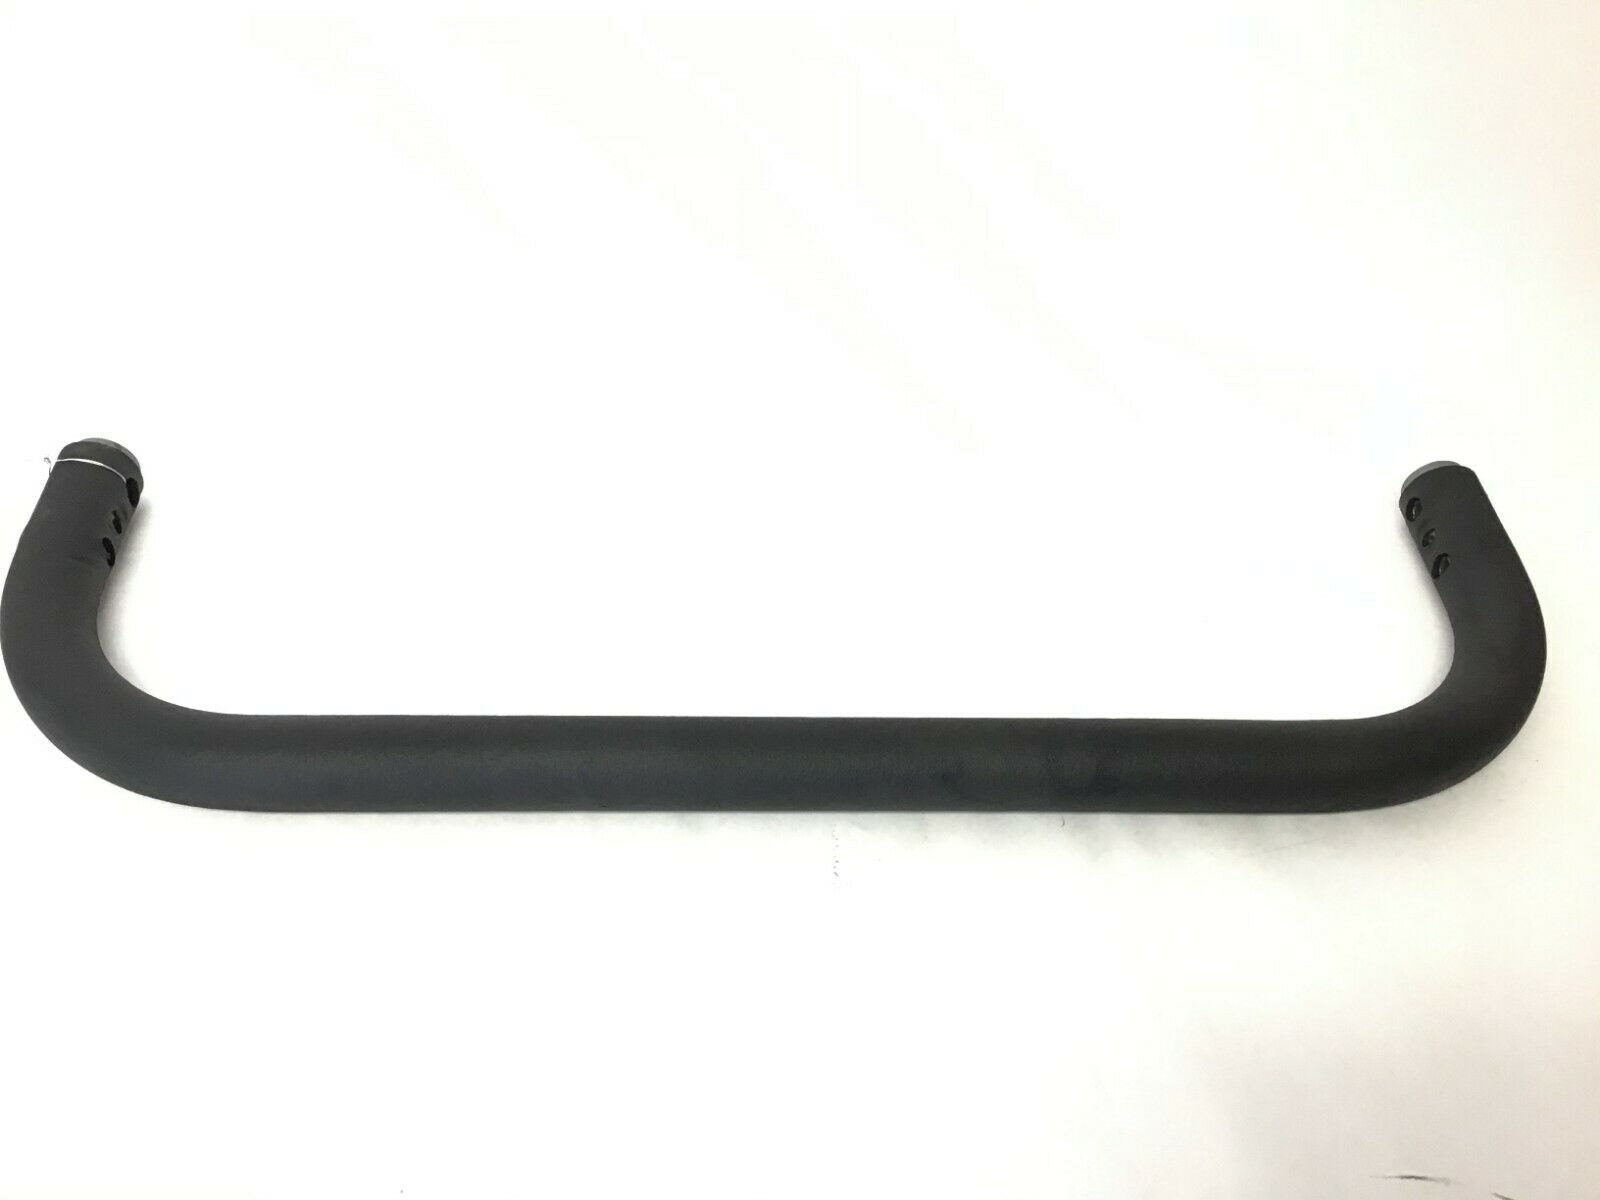 True Fitness Z4HRC Treadmill Front Handle Bar (Used)